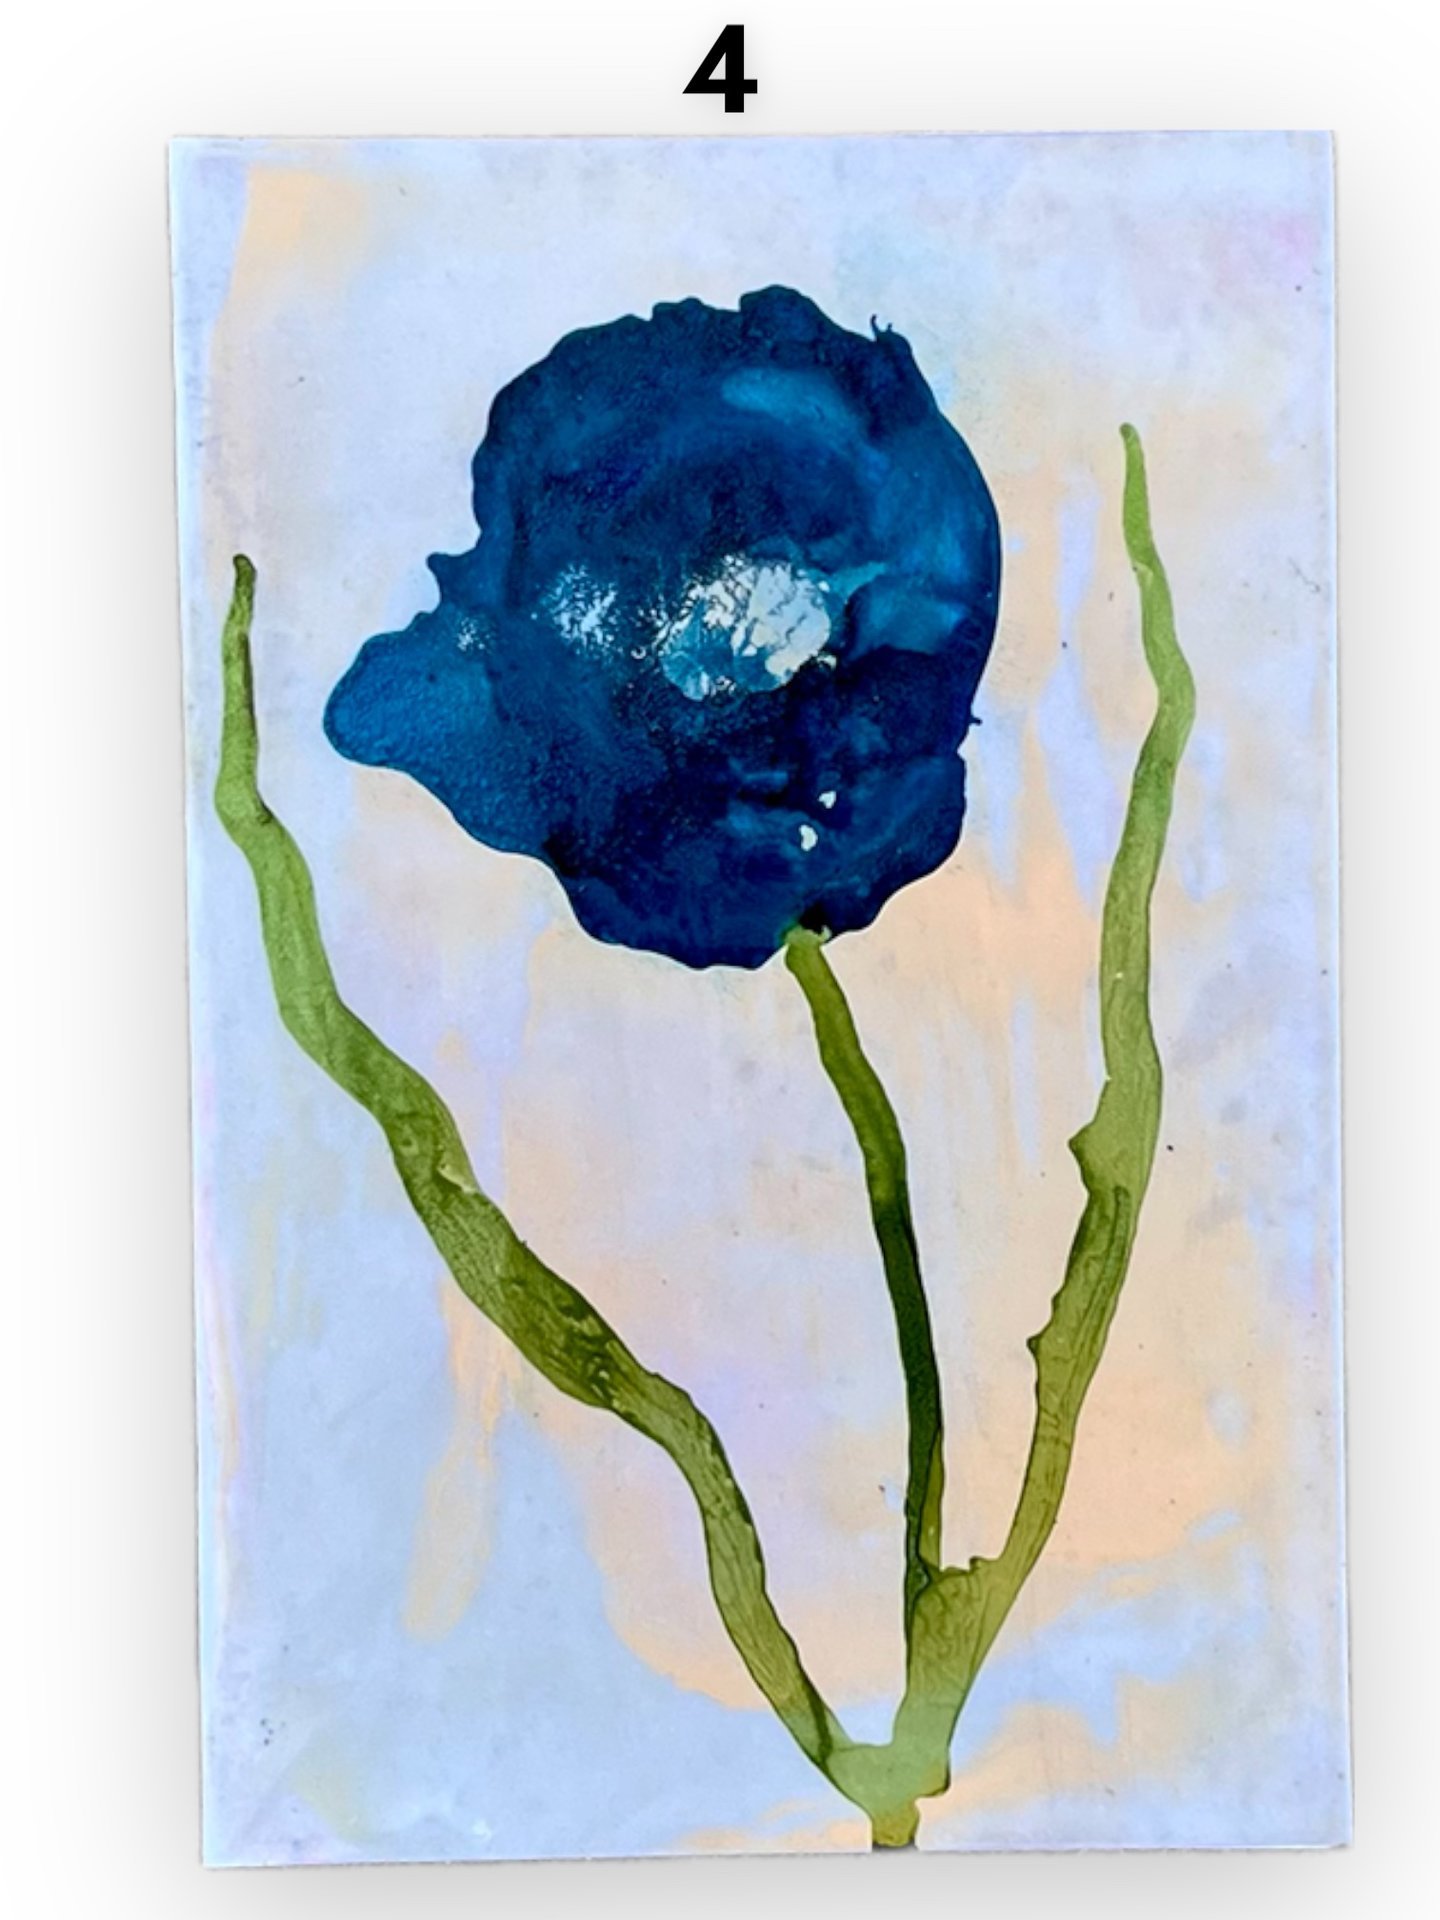 Blue Floral Blank Greeting Cards